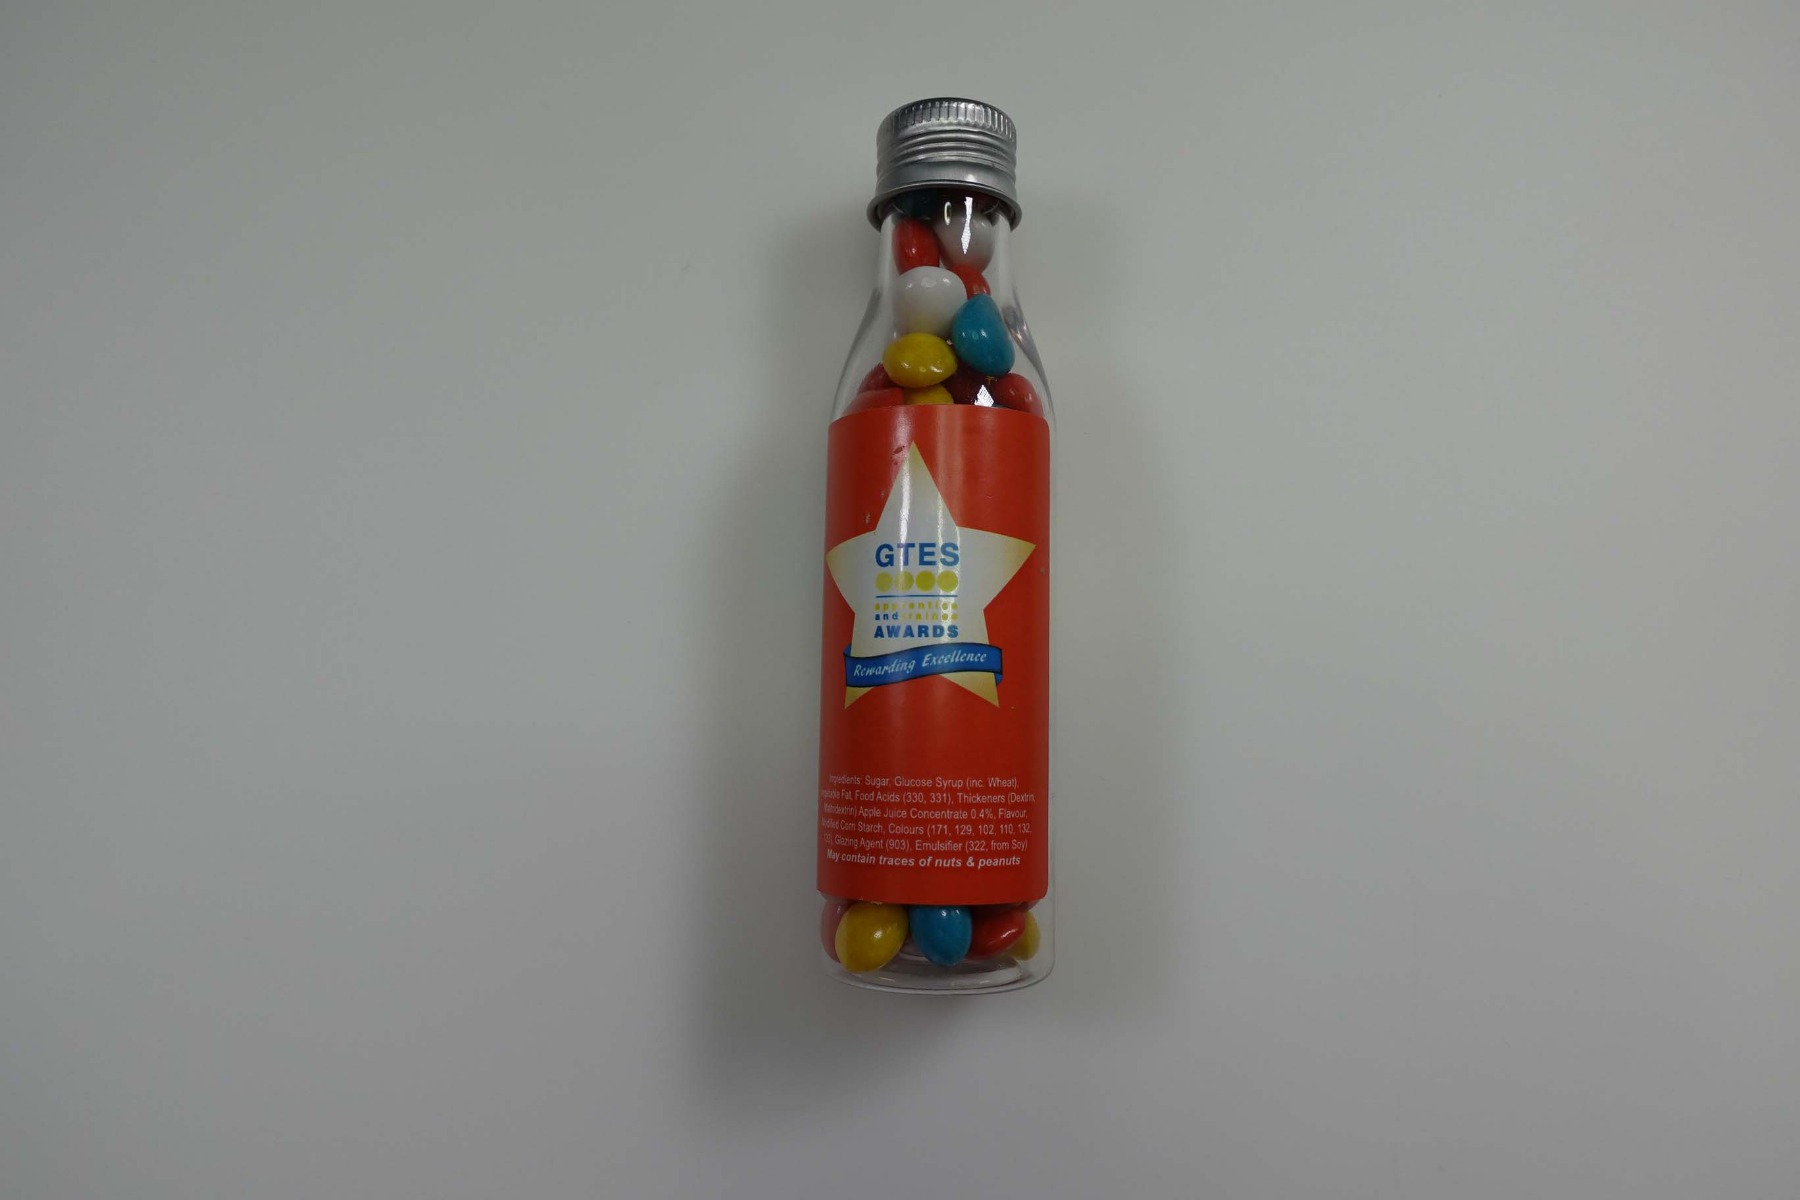 Soda Bottle filled with Jelly Beans